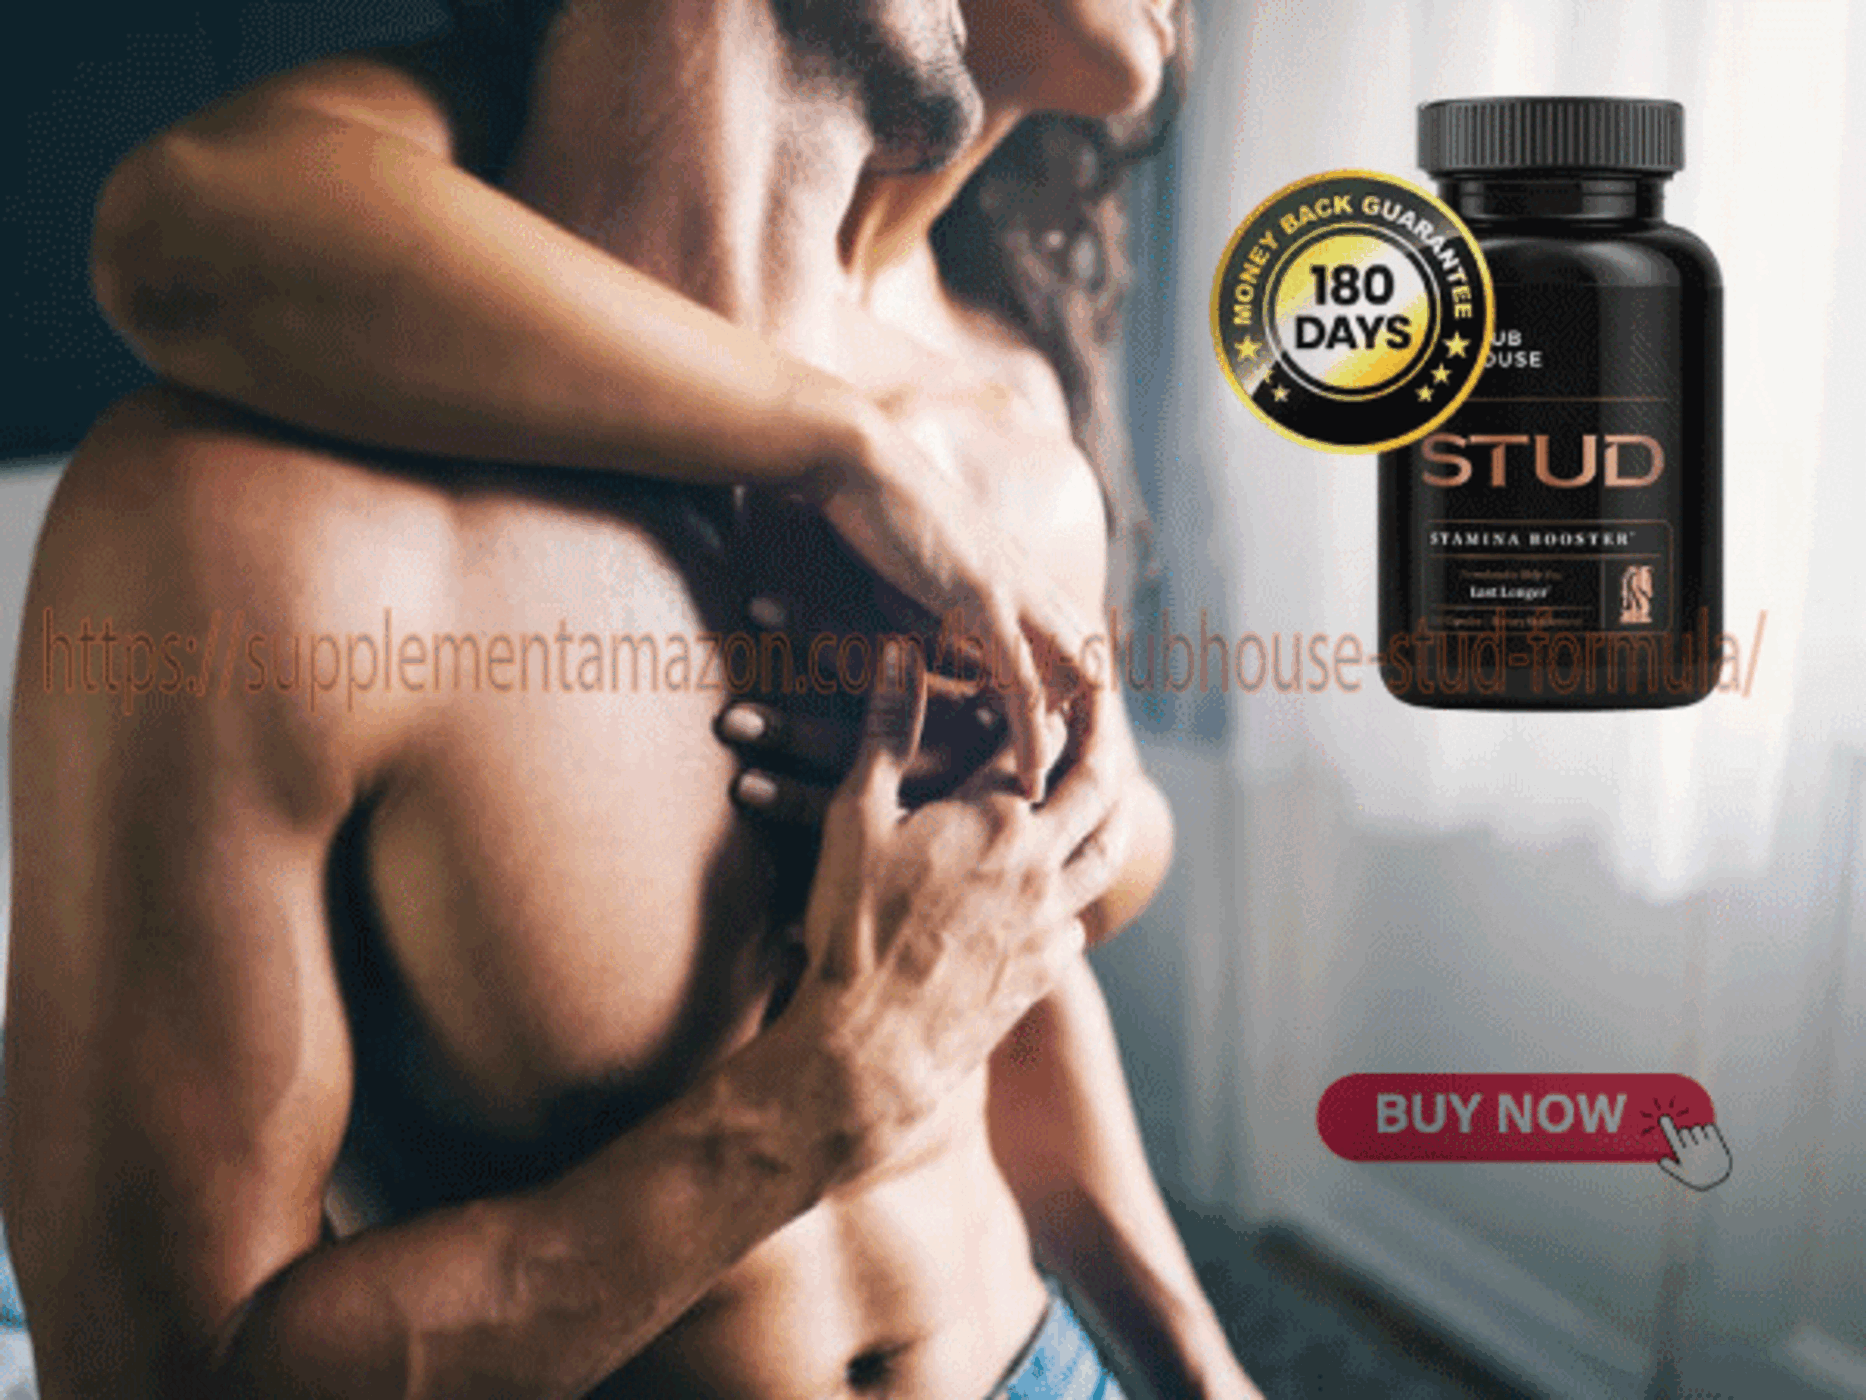 ClubHouse Stud Formula - Price, Benefits, Side Effects, Ingredients, & Reviews